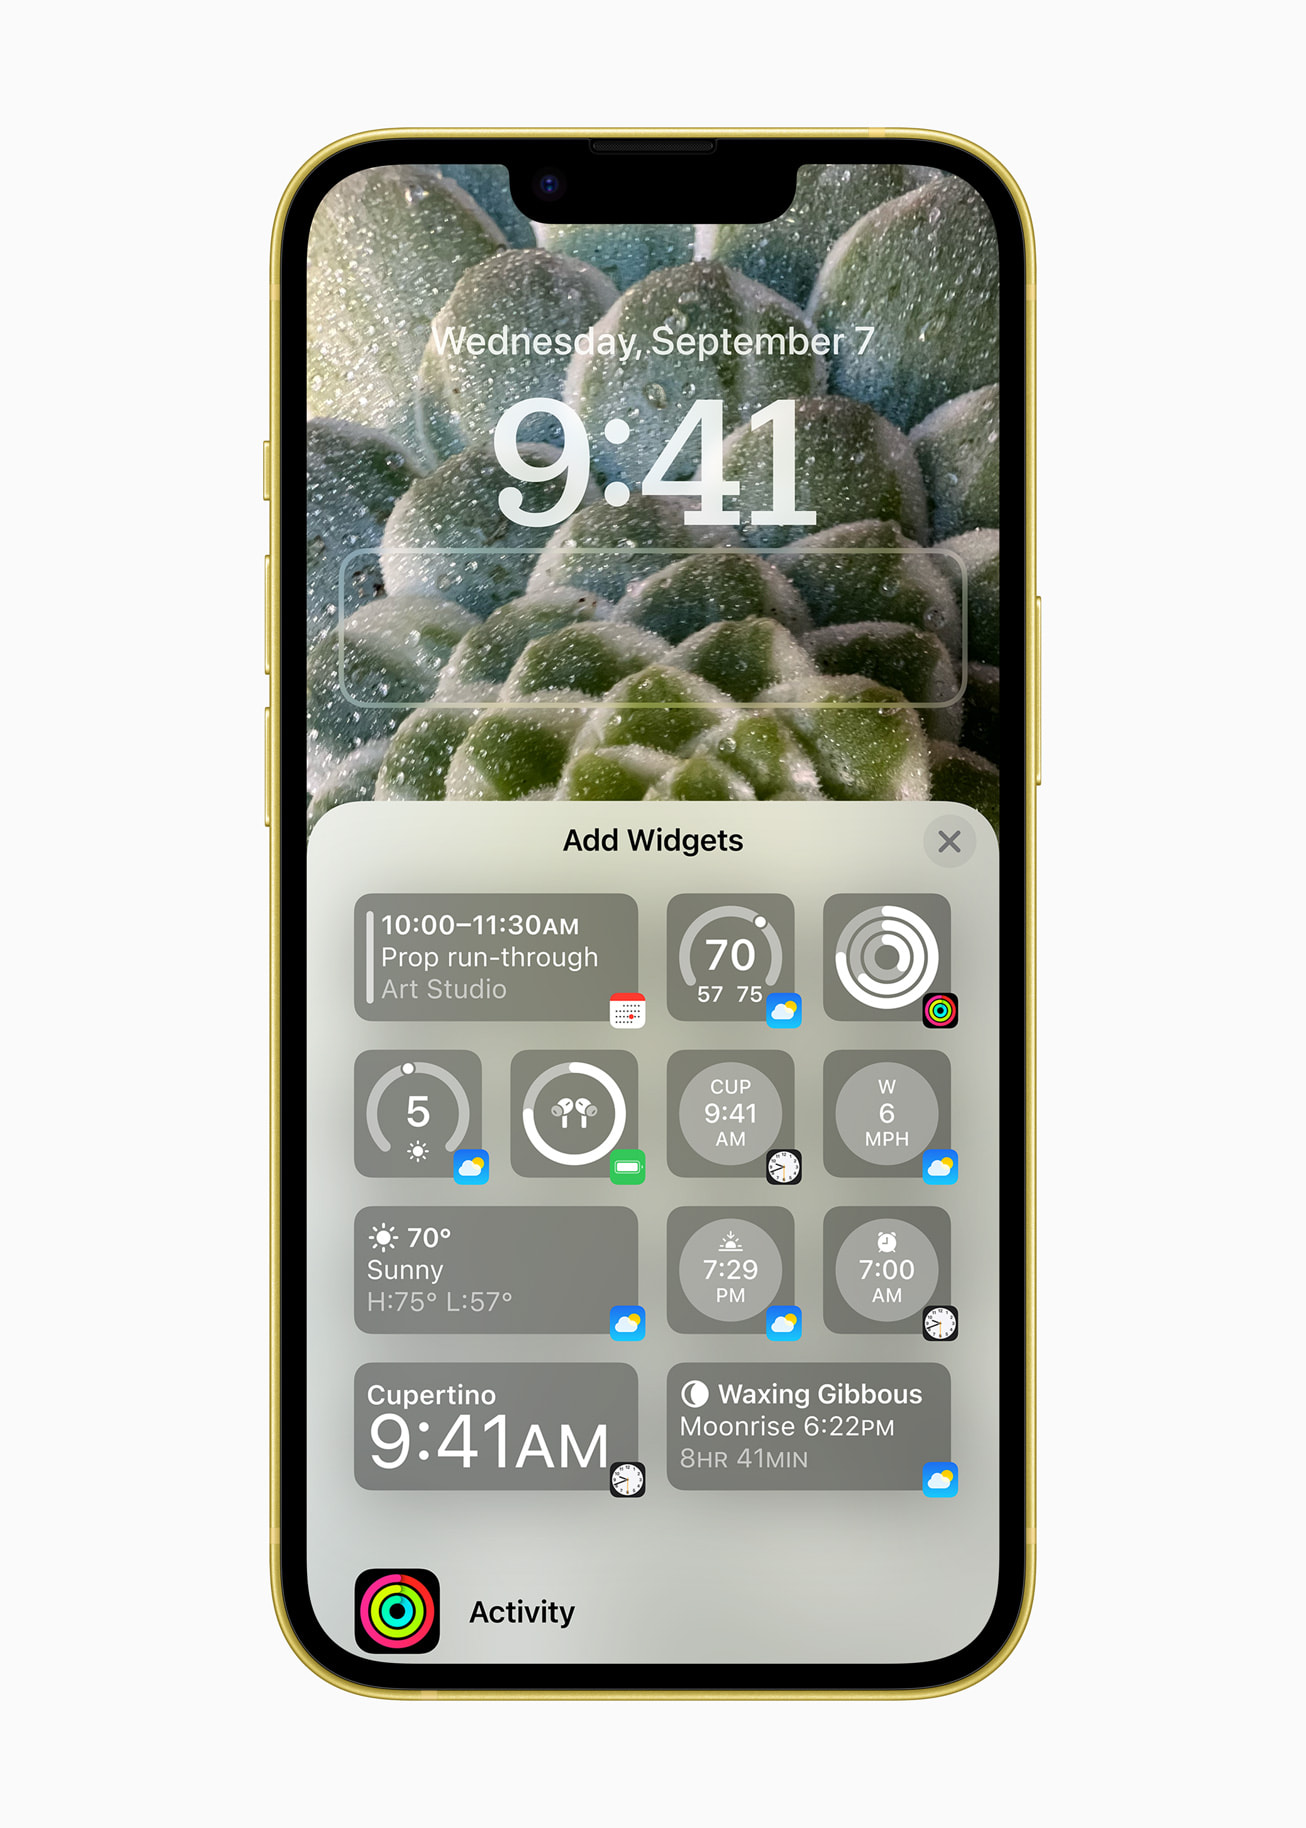 A user is invited to add widgets to their locked screen